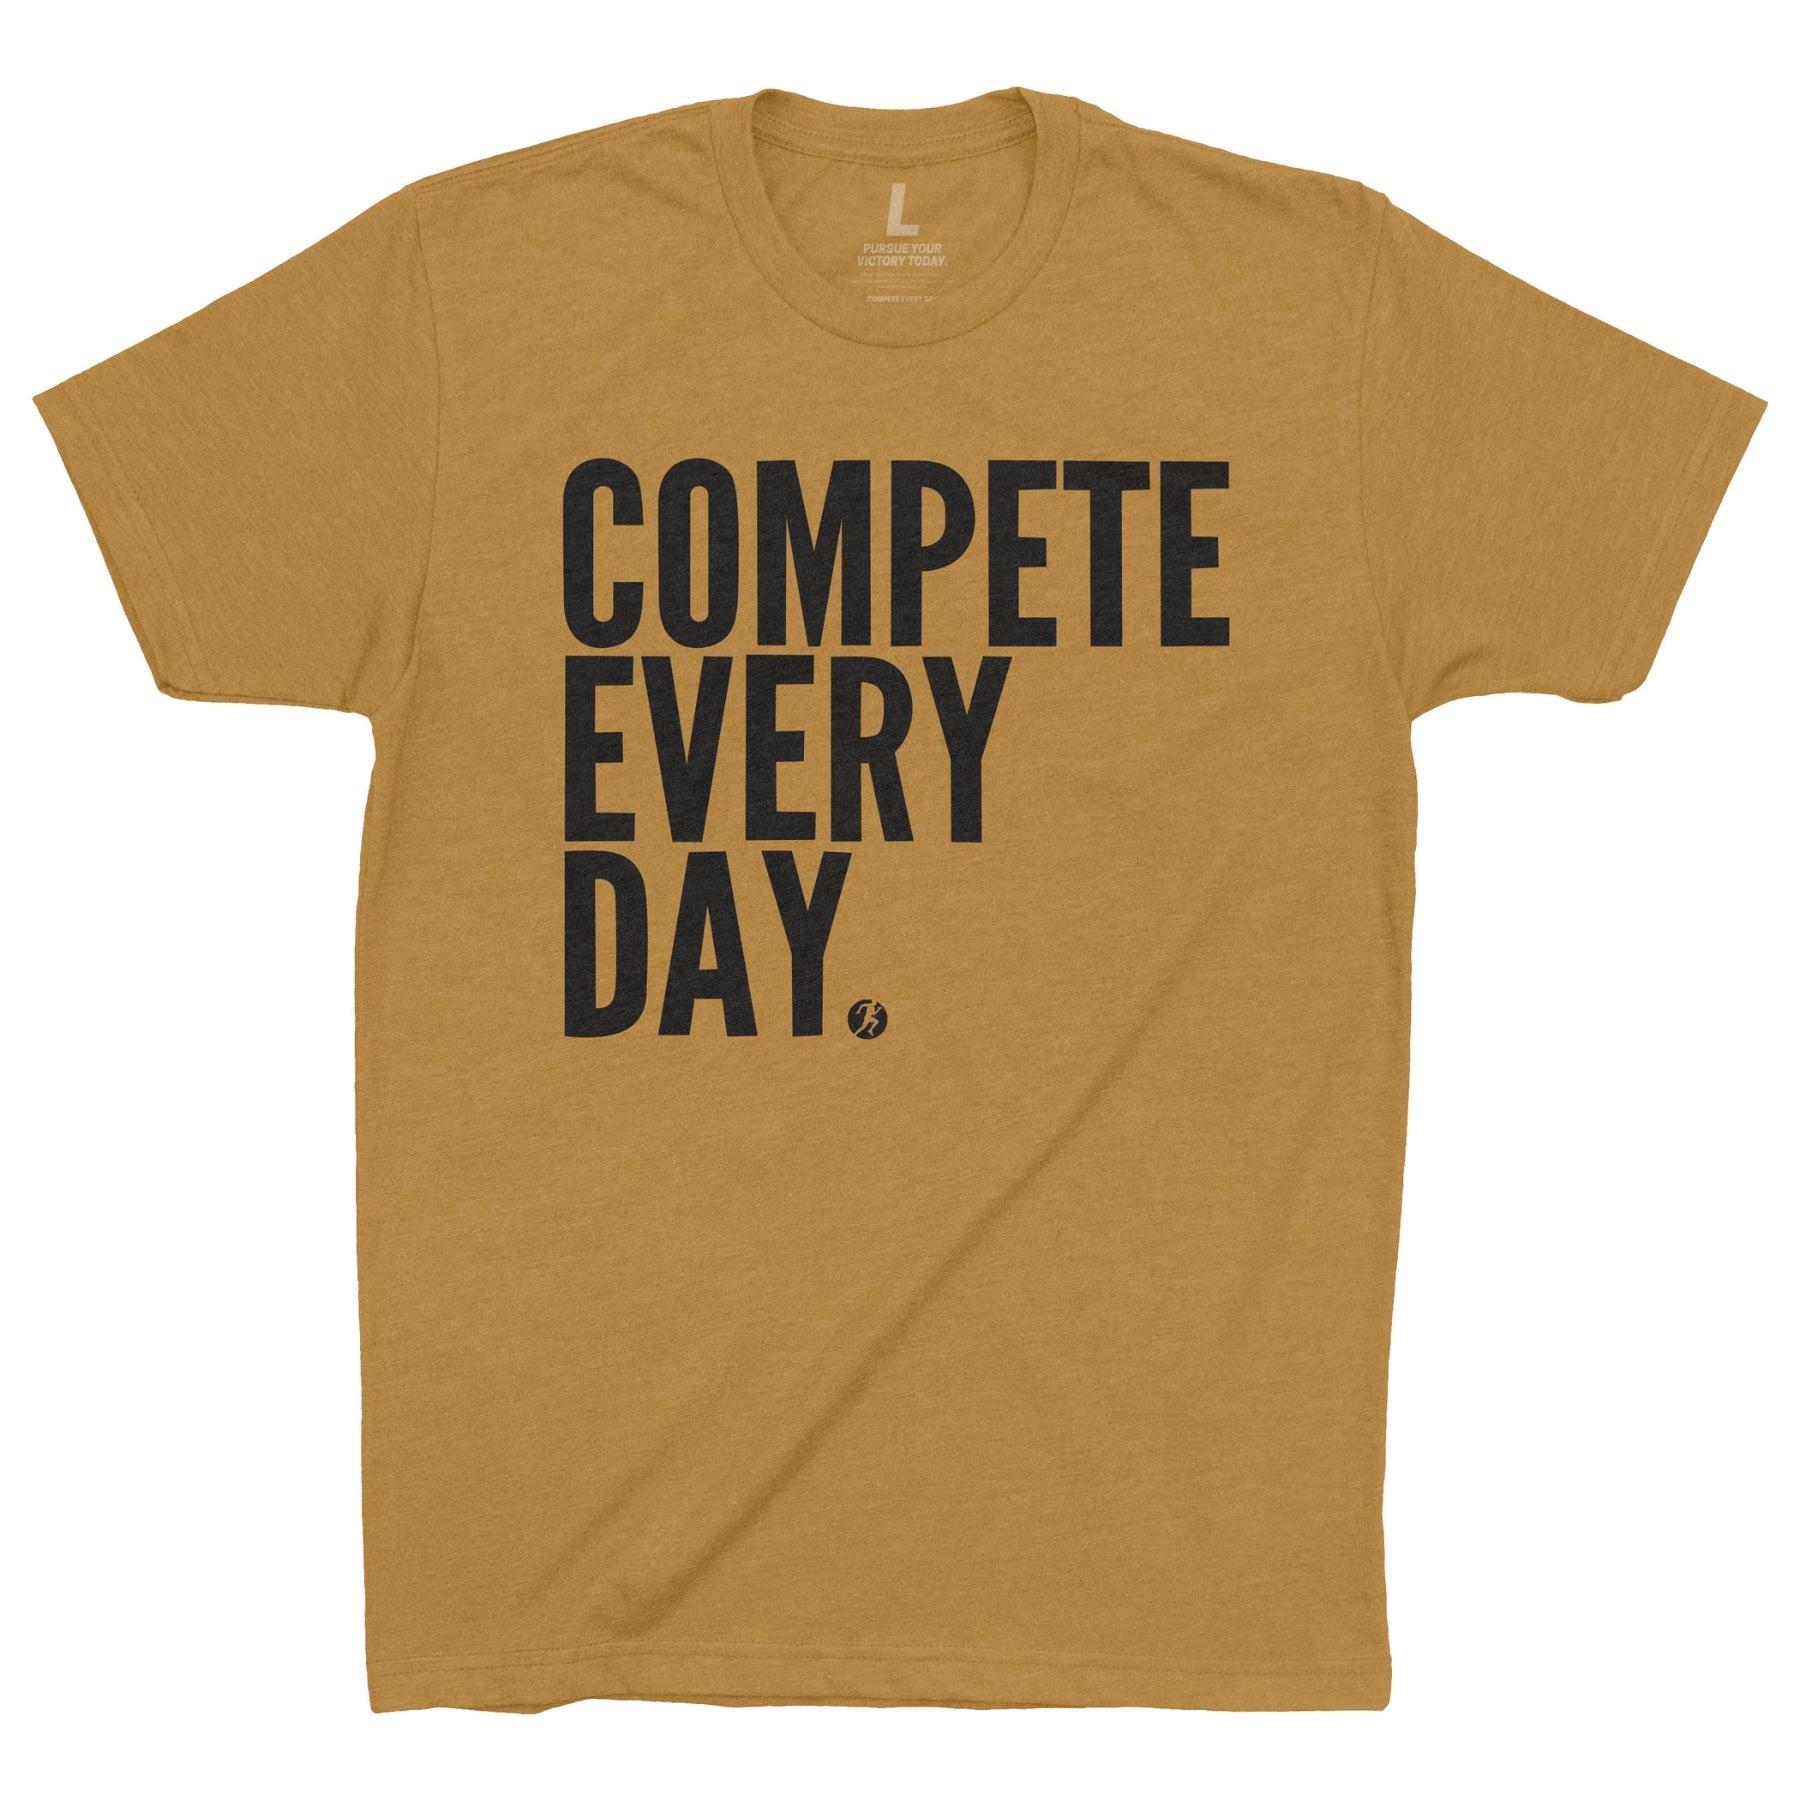 Compete Every Day (gold shirt)